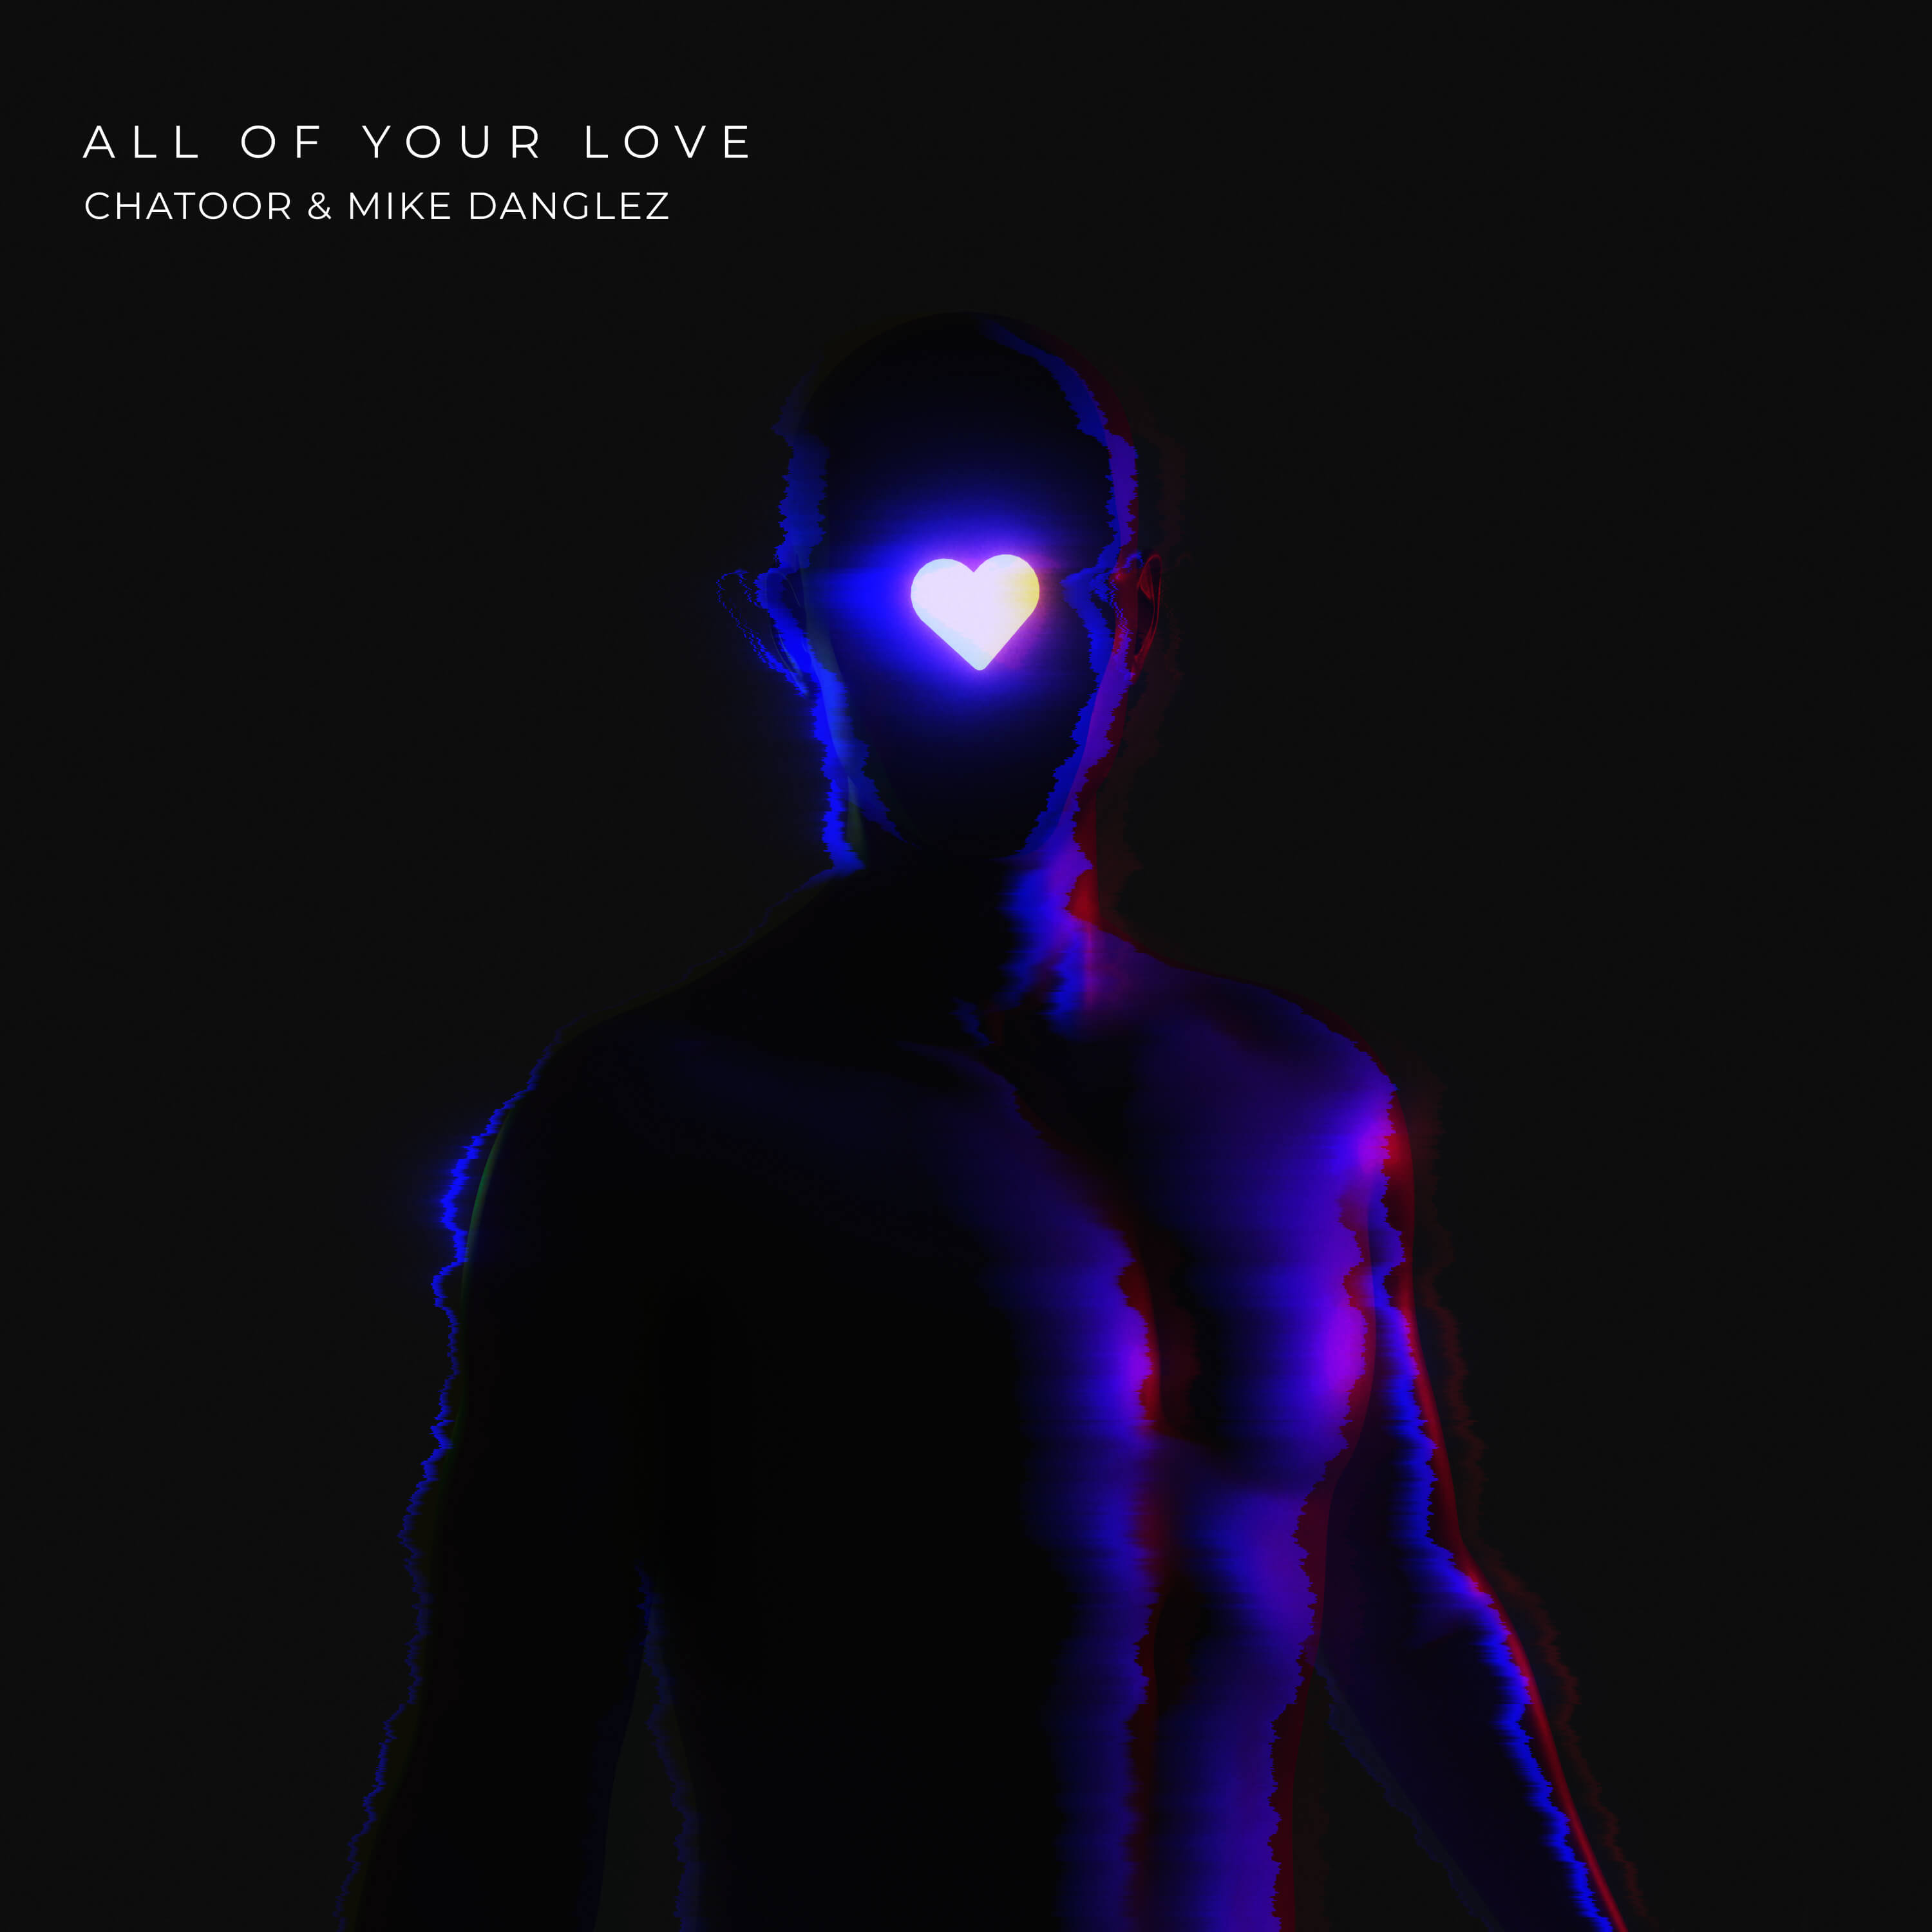 Mike Danglez & Chatoor Stun Us with New Single ‘All Of Your Love’